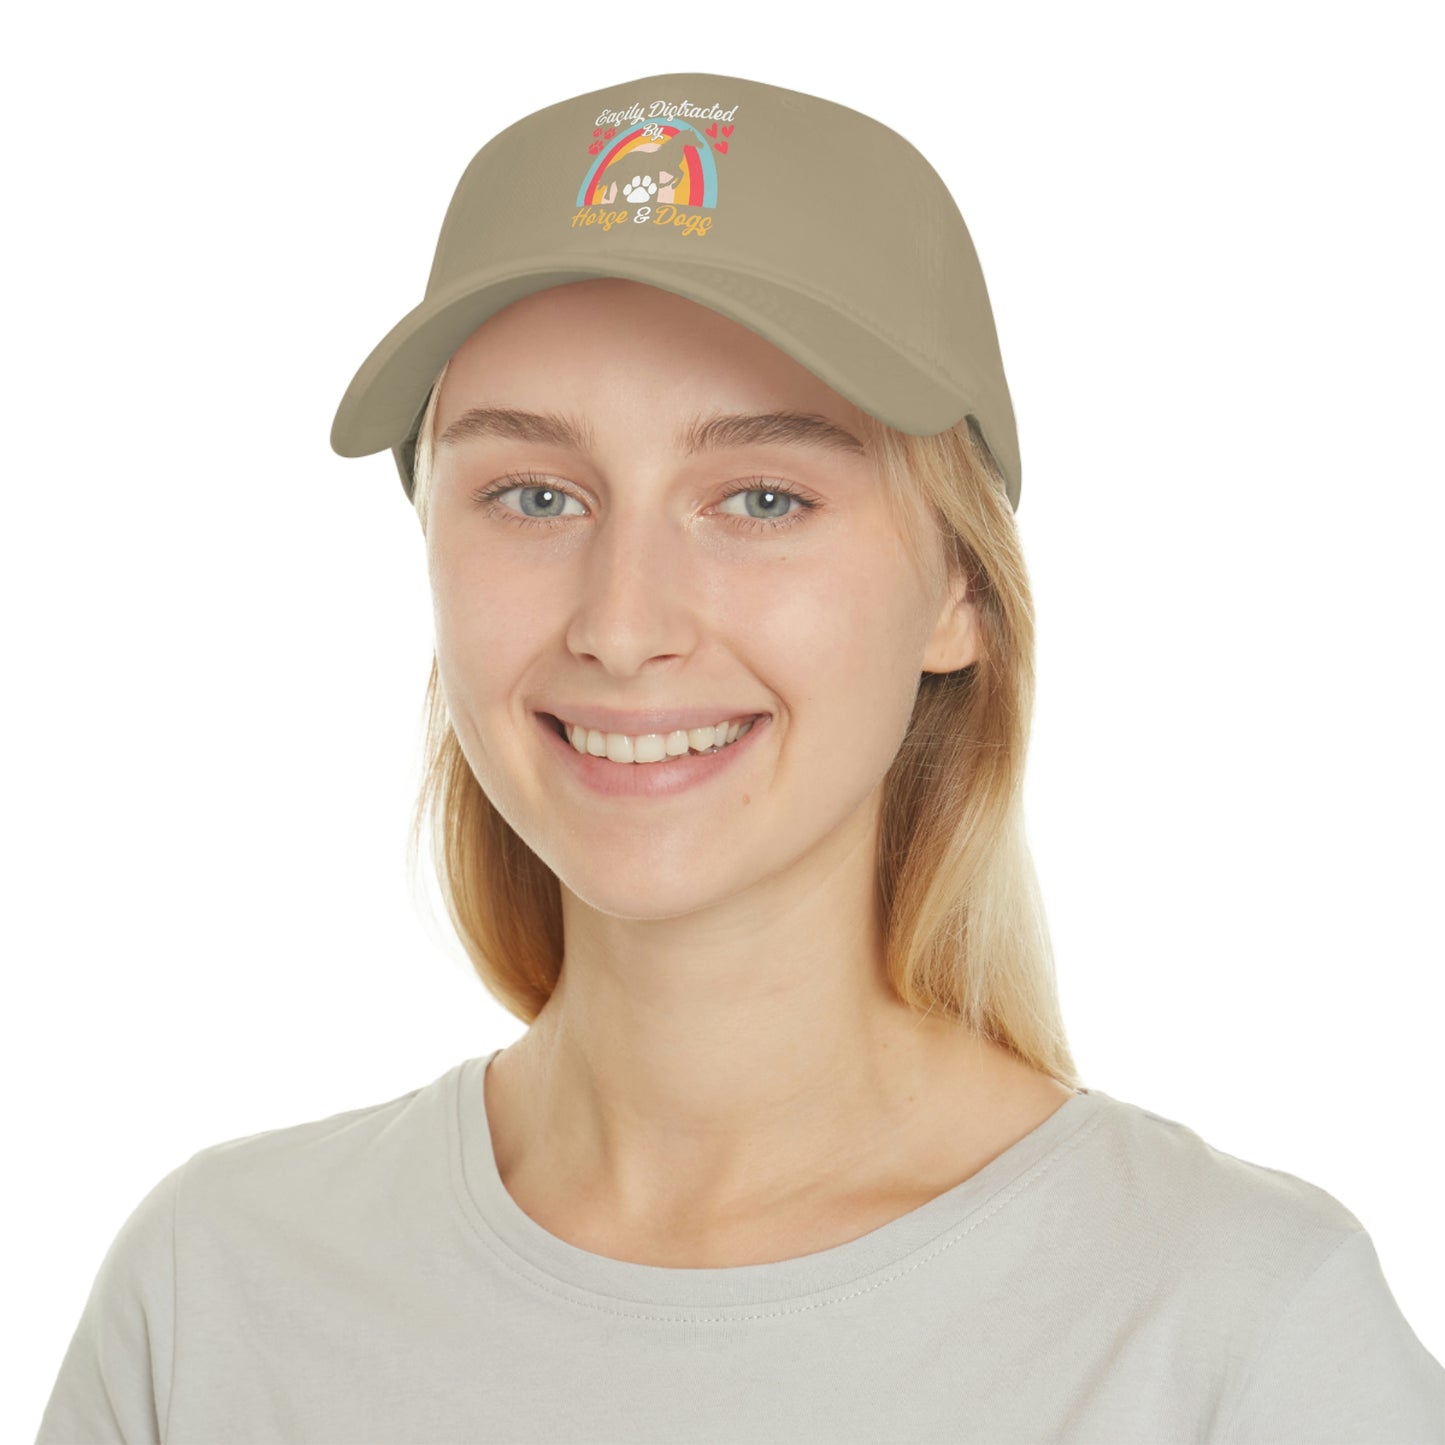 Easily Distracted by Horse & Dogs Low Profile Baseball Cap